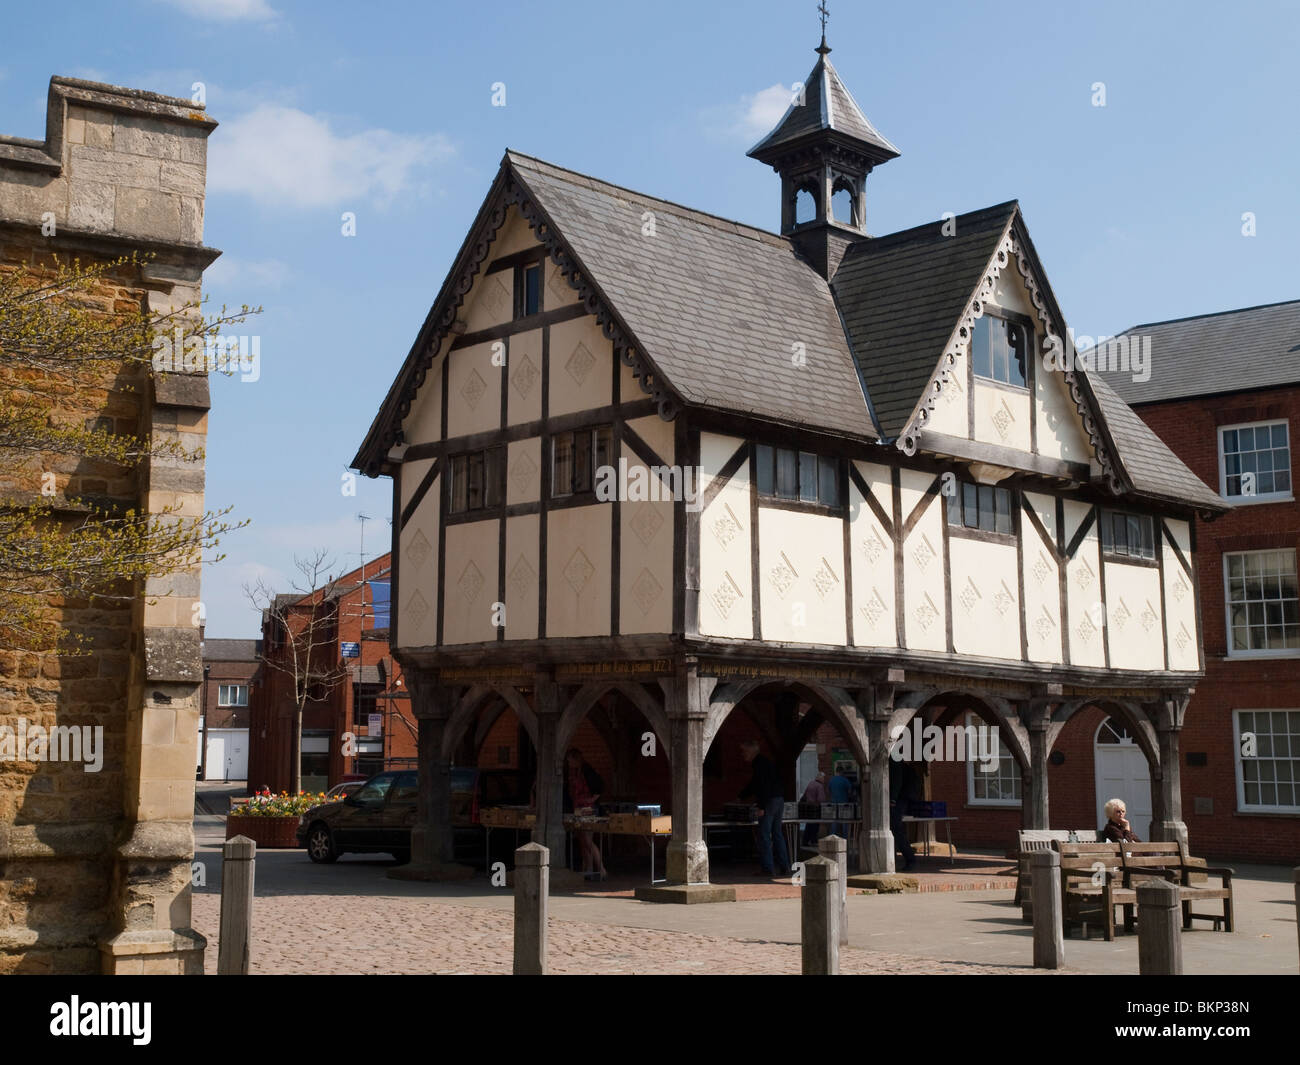 The Old Grammar School in Market Harborough, Leicestershire England UK Stock Photo